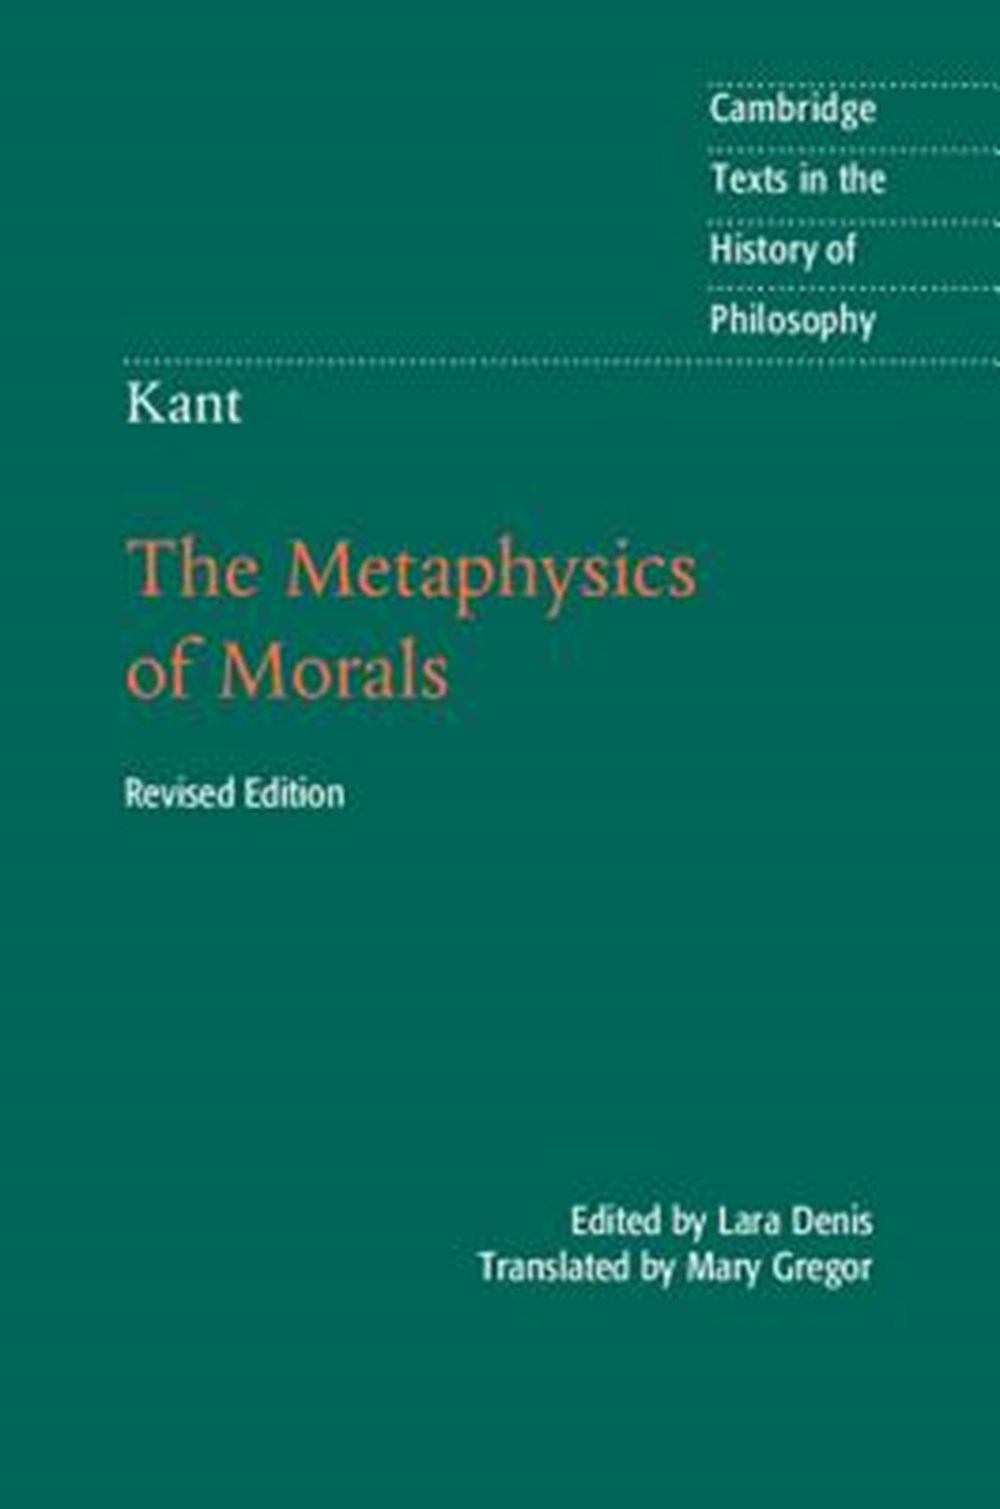 Kant The Metaphysics of Morals